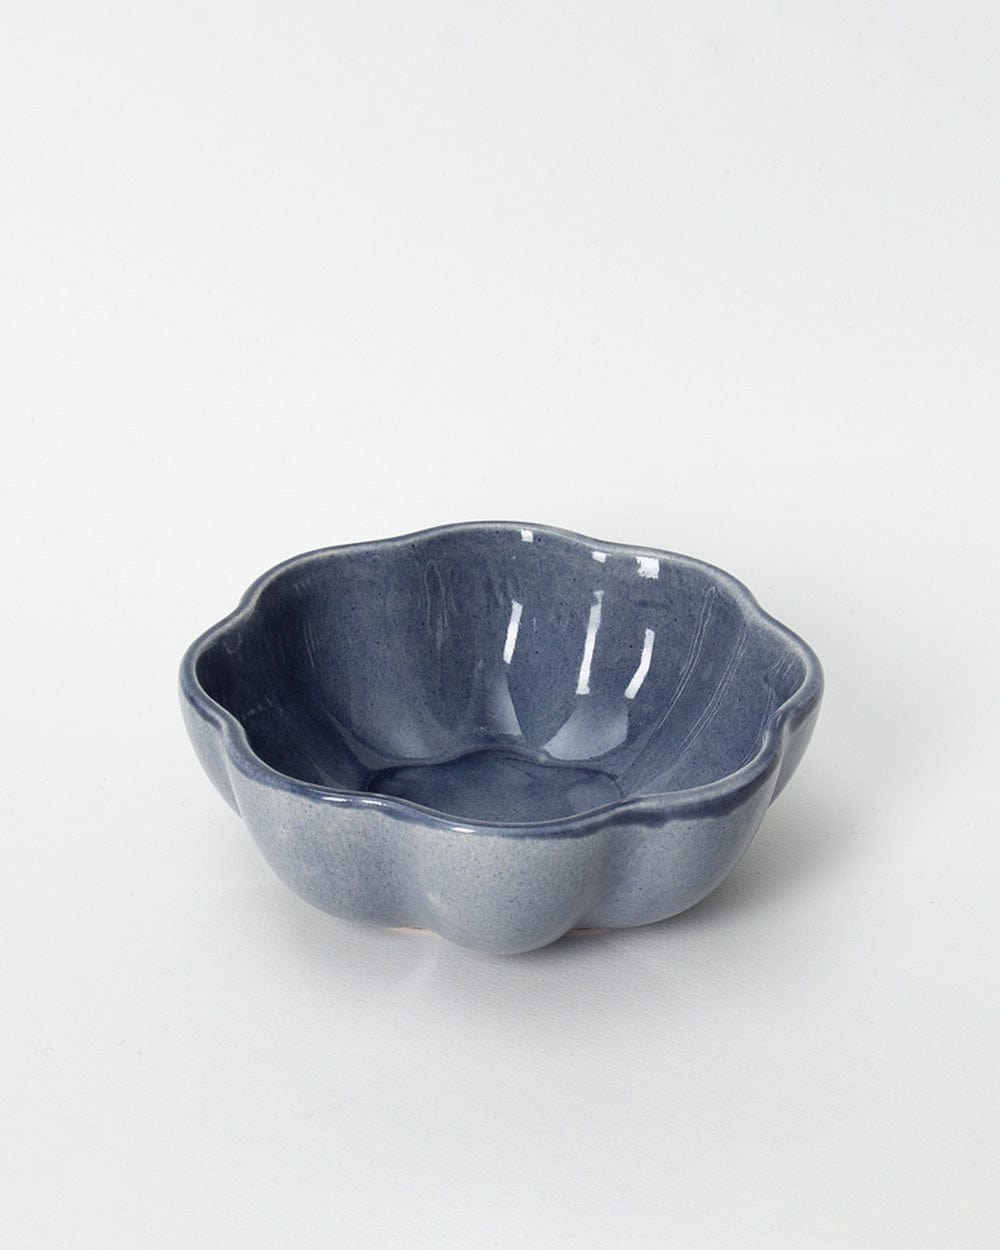 Ware Innovations Serving Bowls Stormy Blue / 19 x 19 x 7.5 cm / 7.5 x 7.5 x 3 in Margaret Bowl Stormy Blue